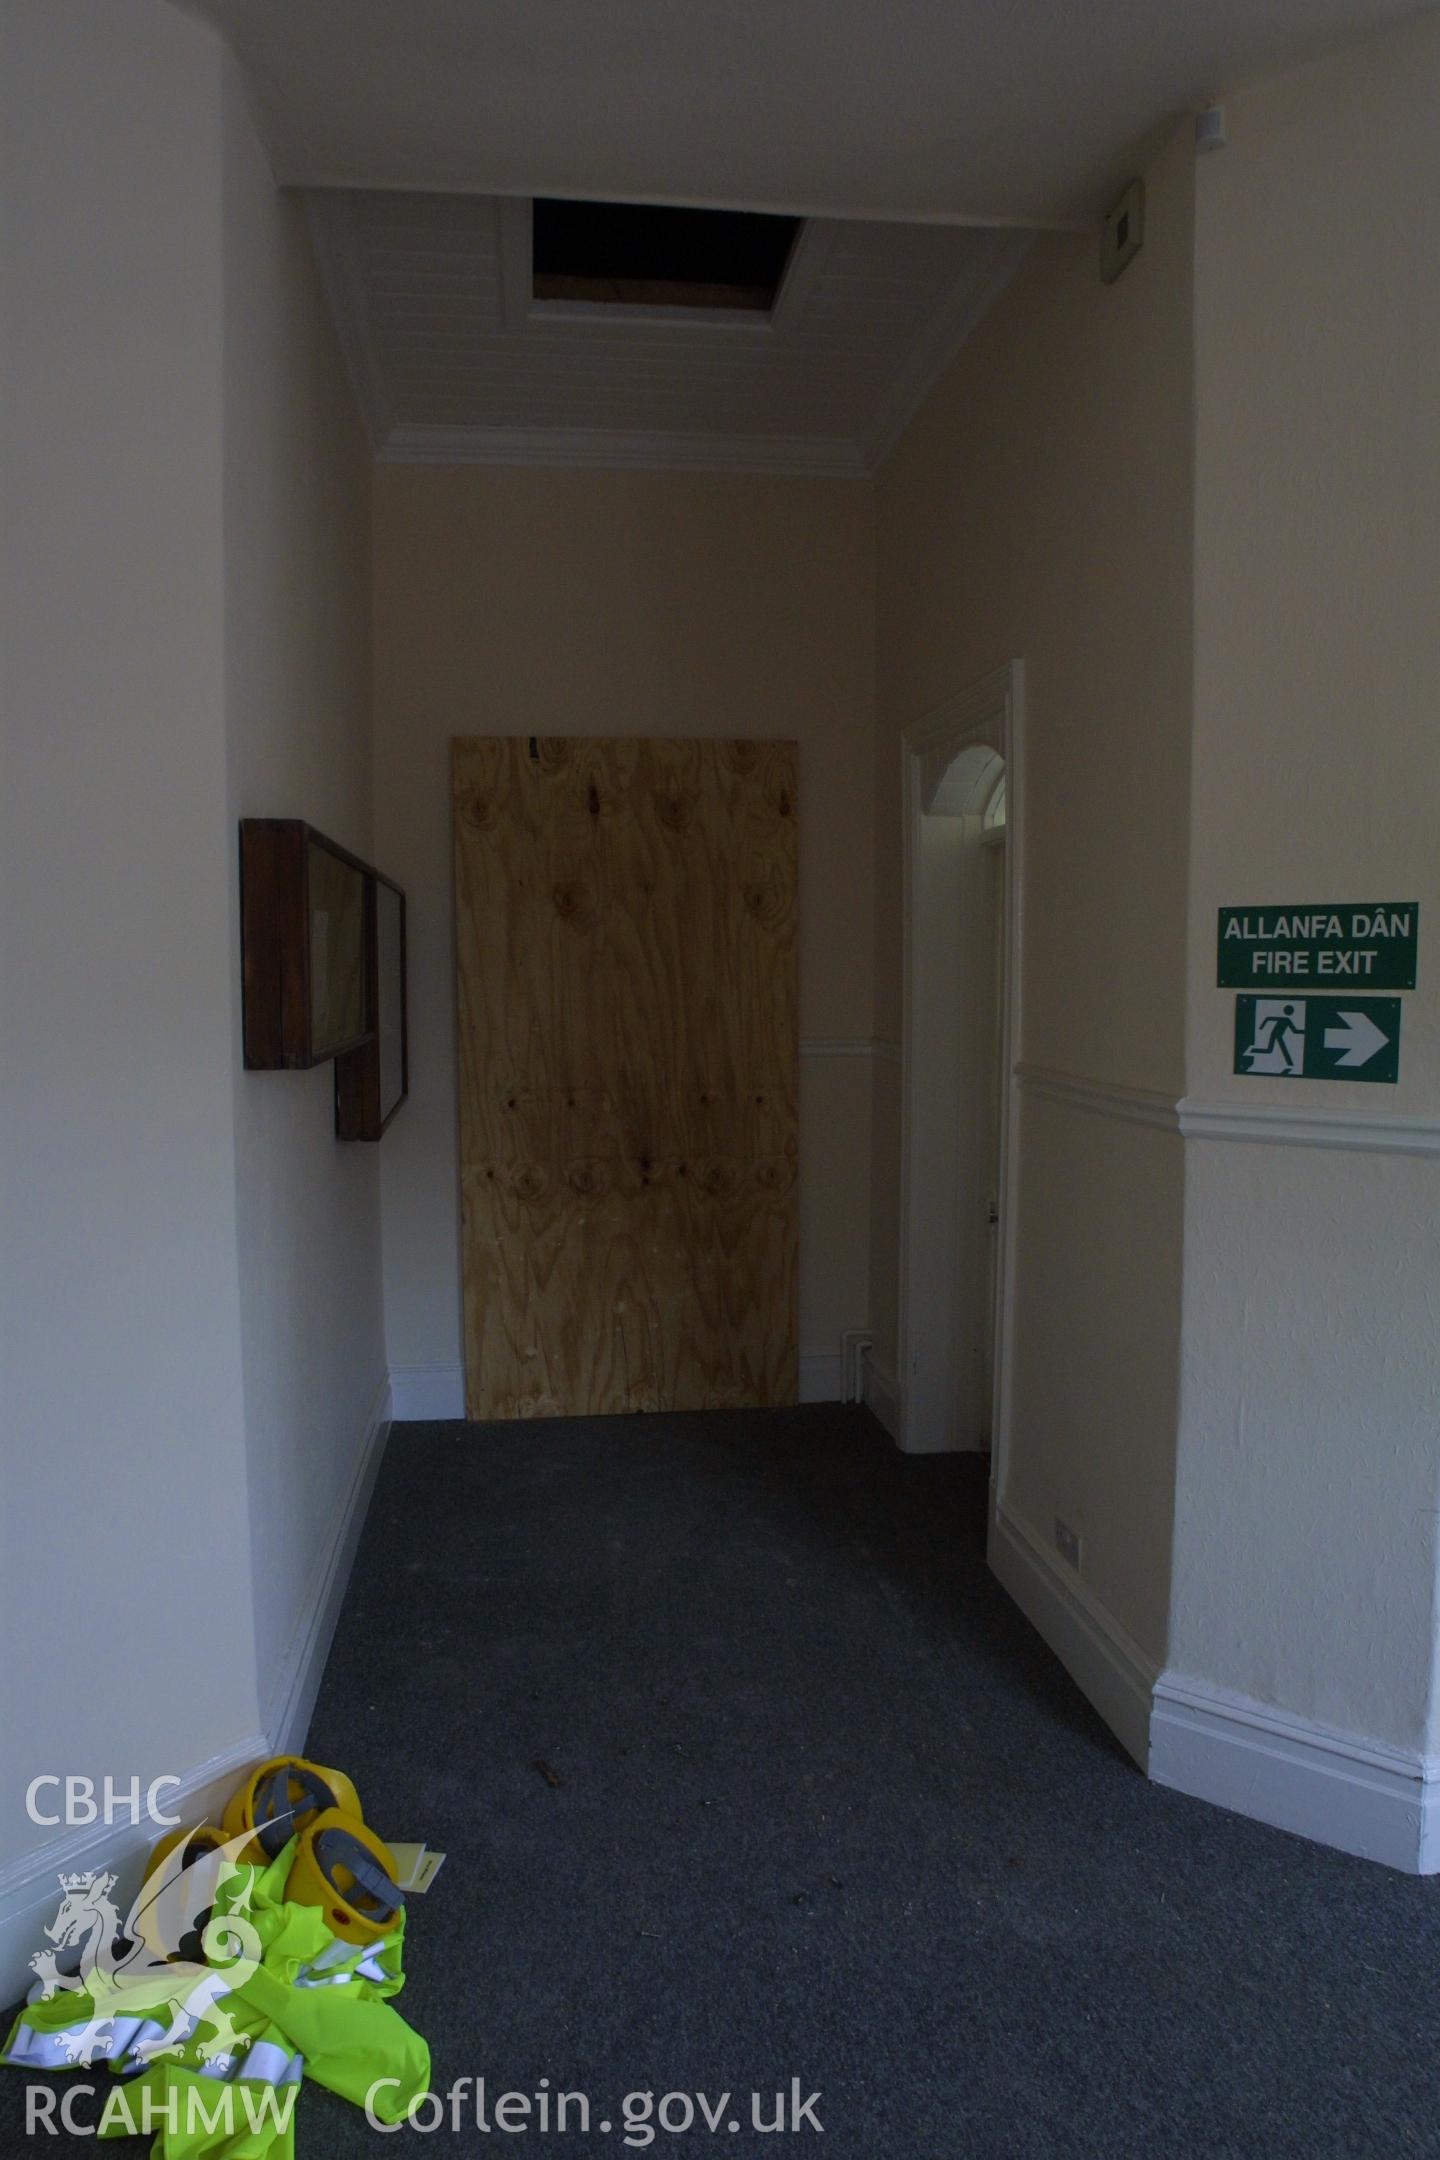 Digital colour photograph showing part of the interior at the Penrhyn Quarry Offices.